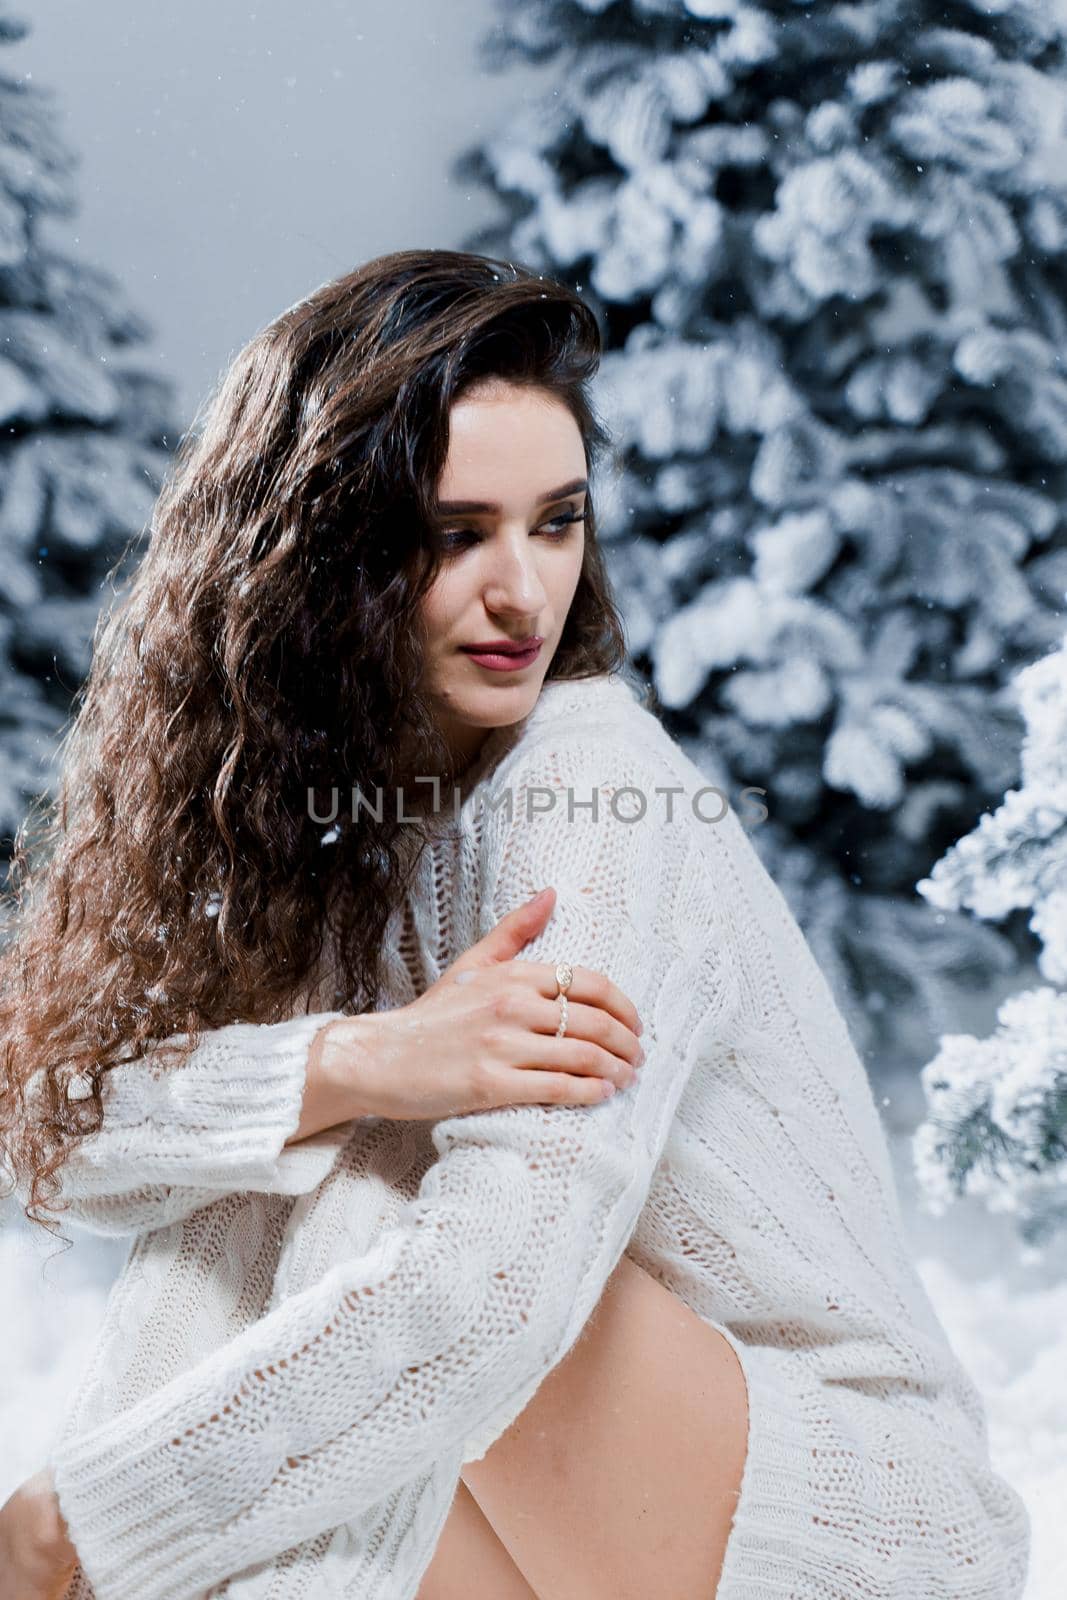 Attractive girl in a warm white sweater and white socks near snowy trees before the new year. Christmas holiday by Rabizo